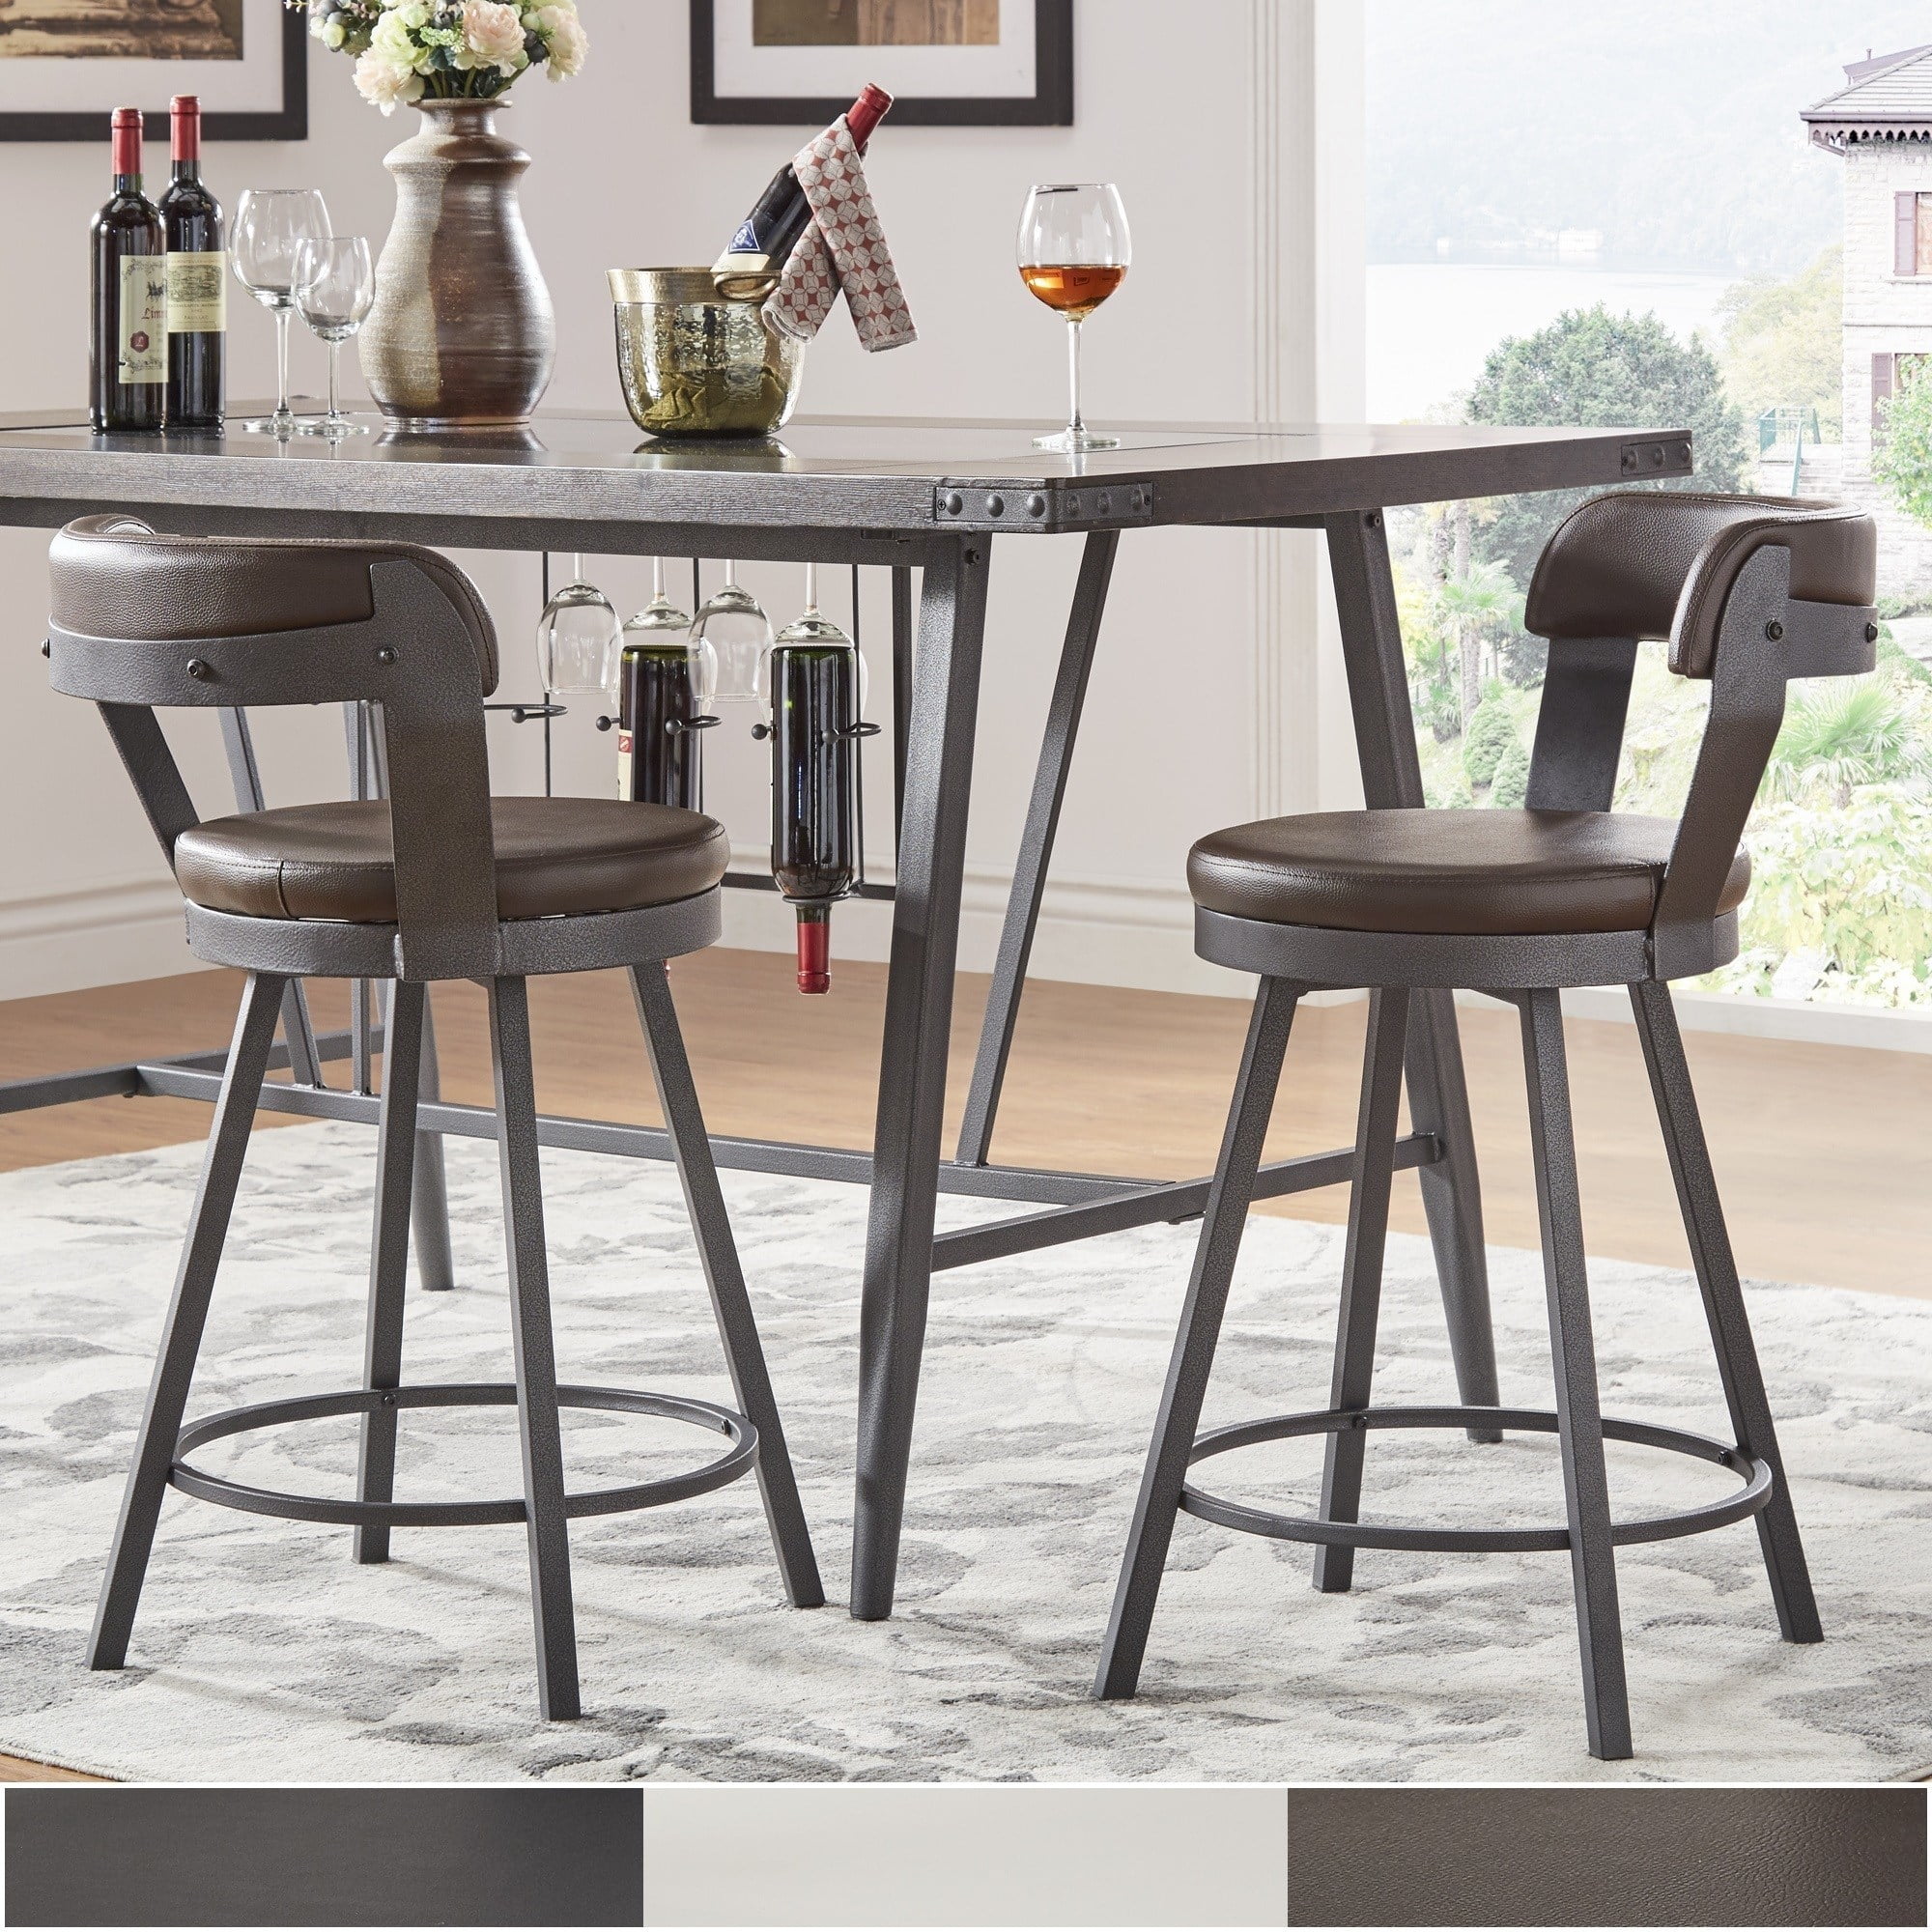 Inspire Q Harley Faux Leatr And Metal, Inspire Q Bar Stools